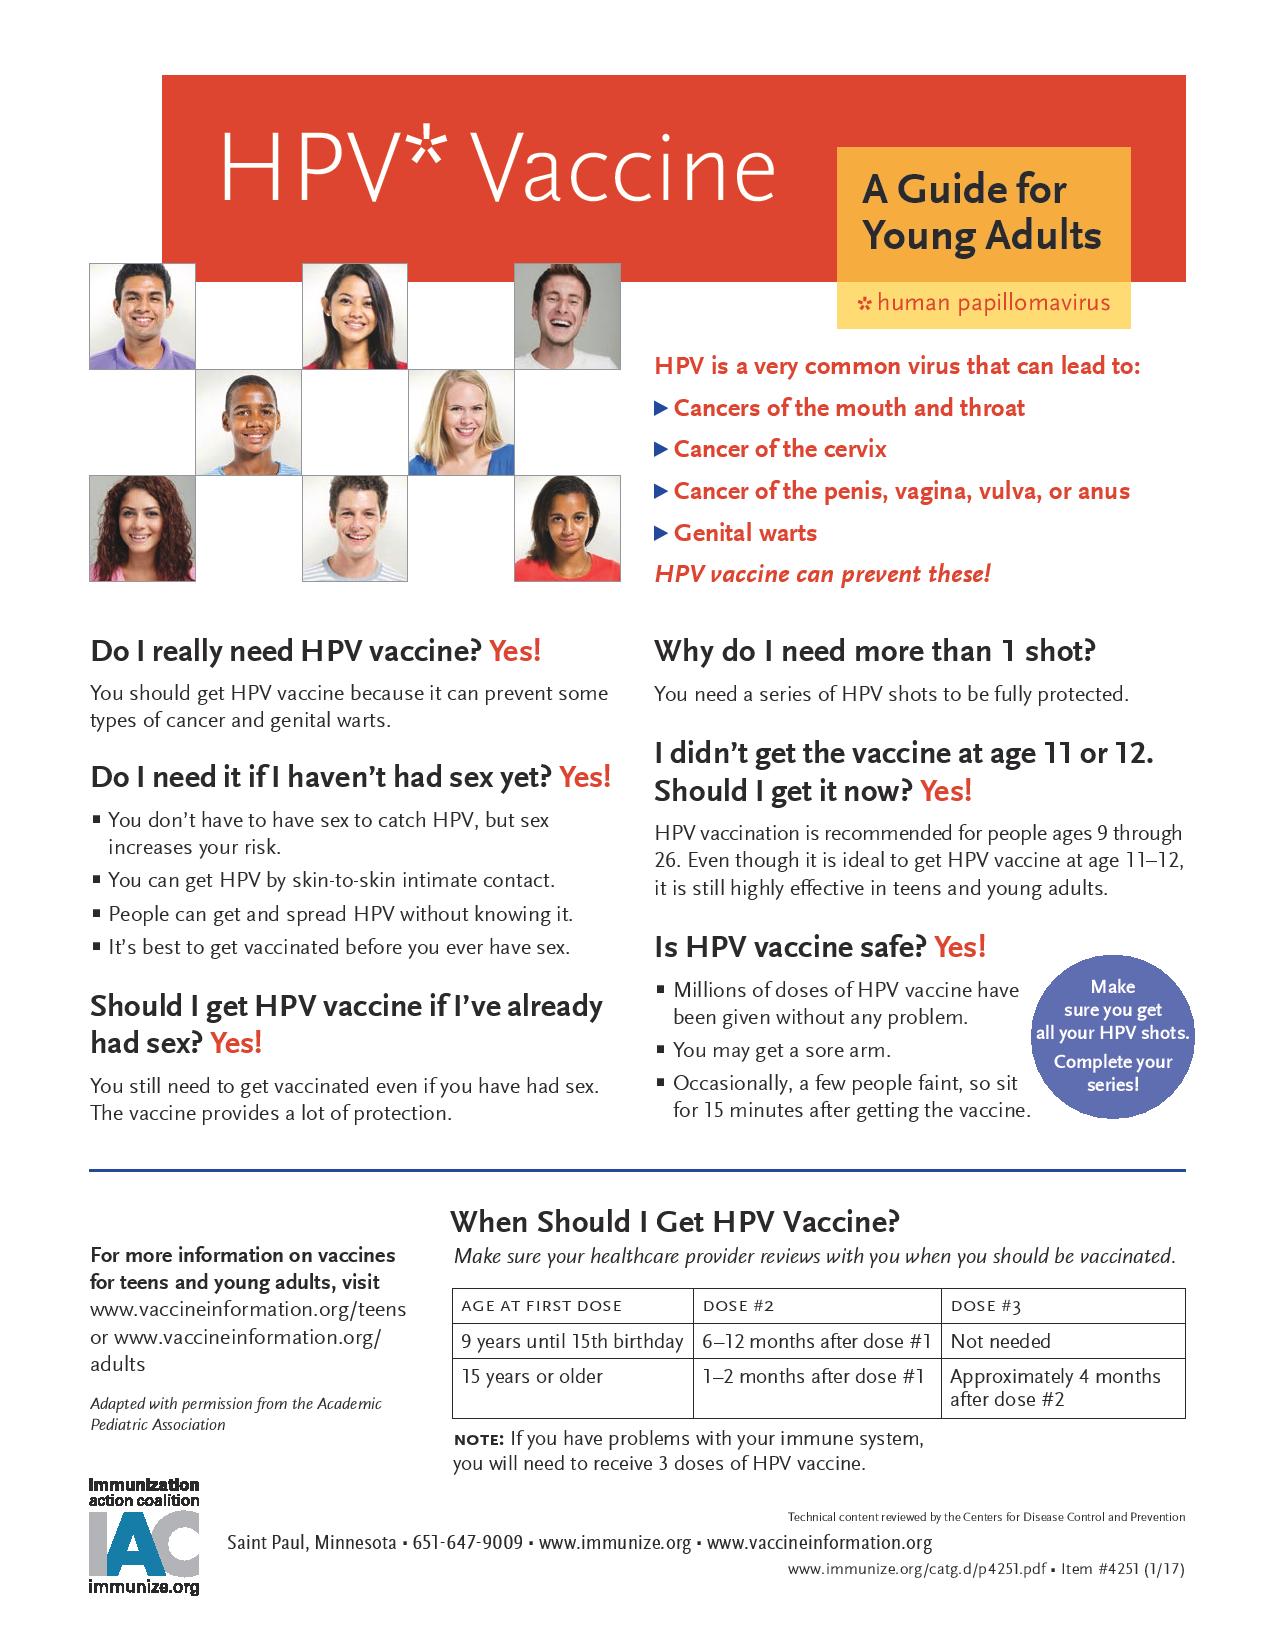 HPV Vaccine guide for young adults fact sheet